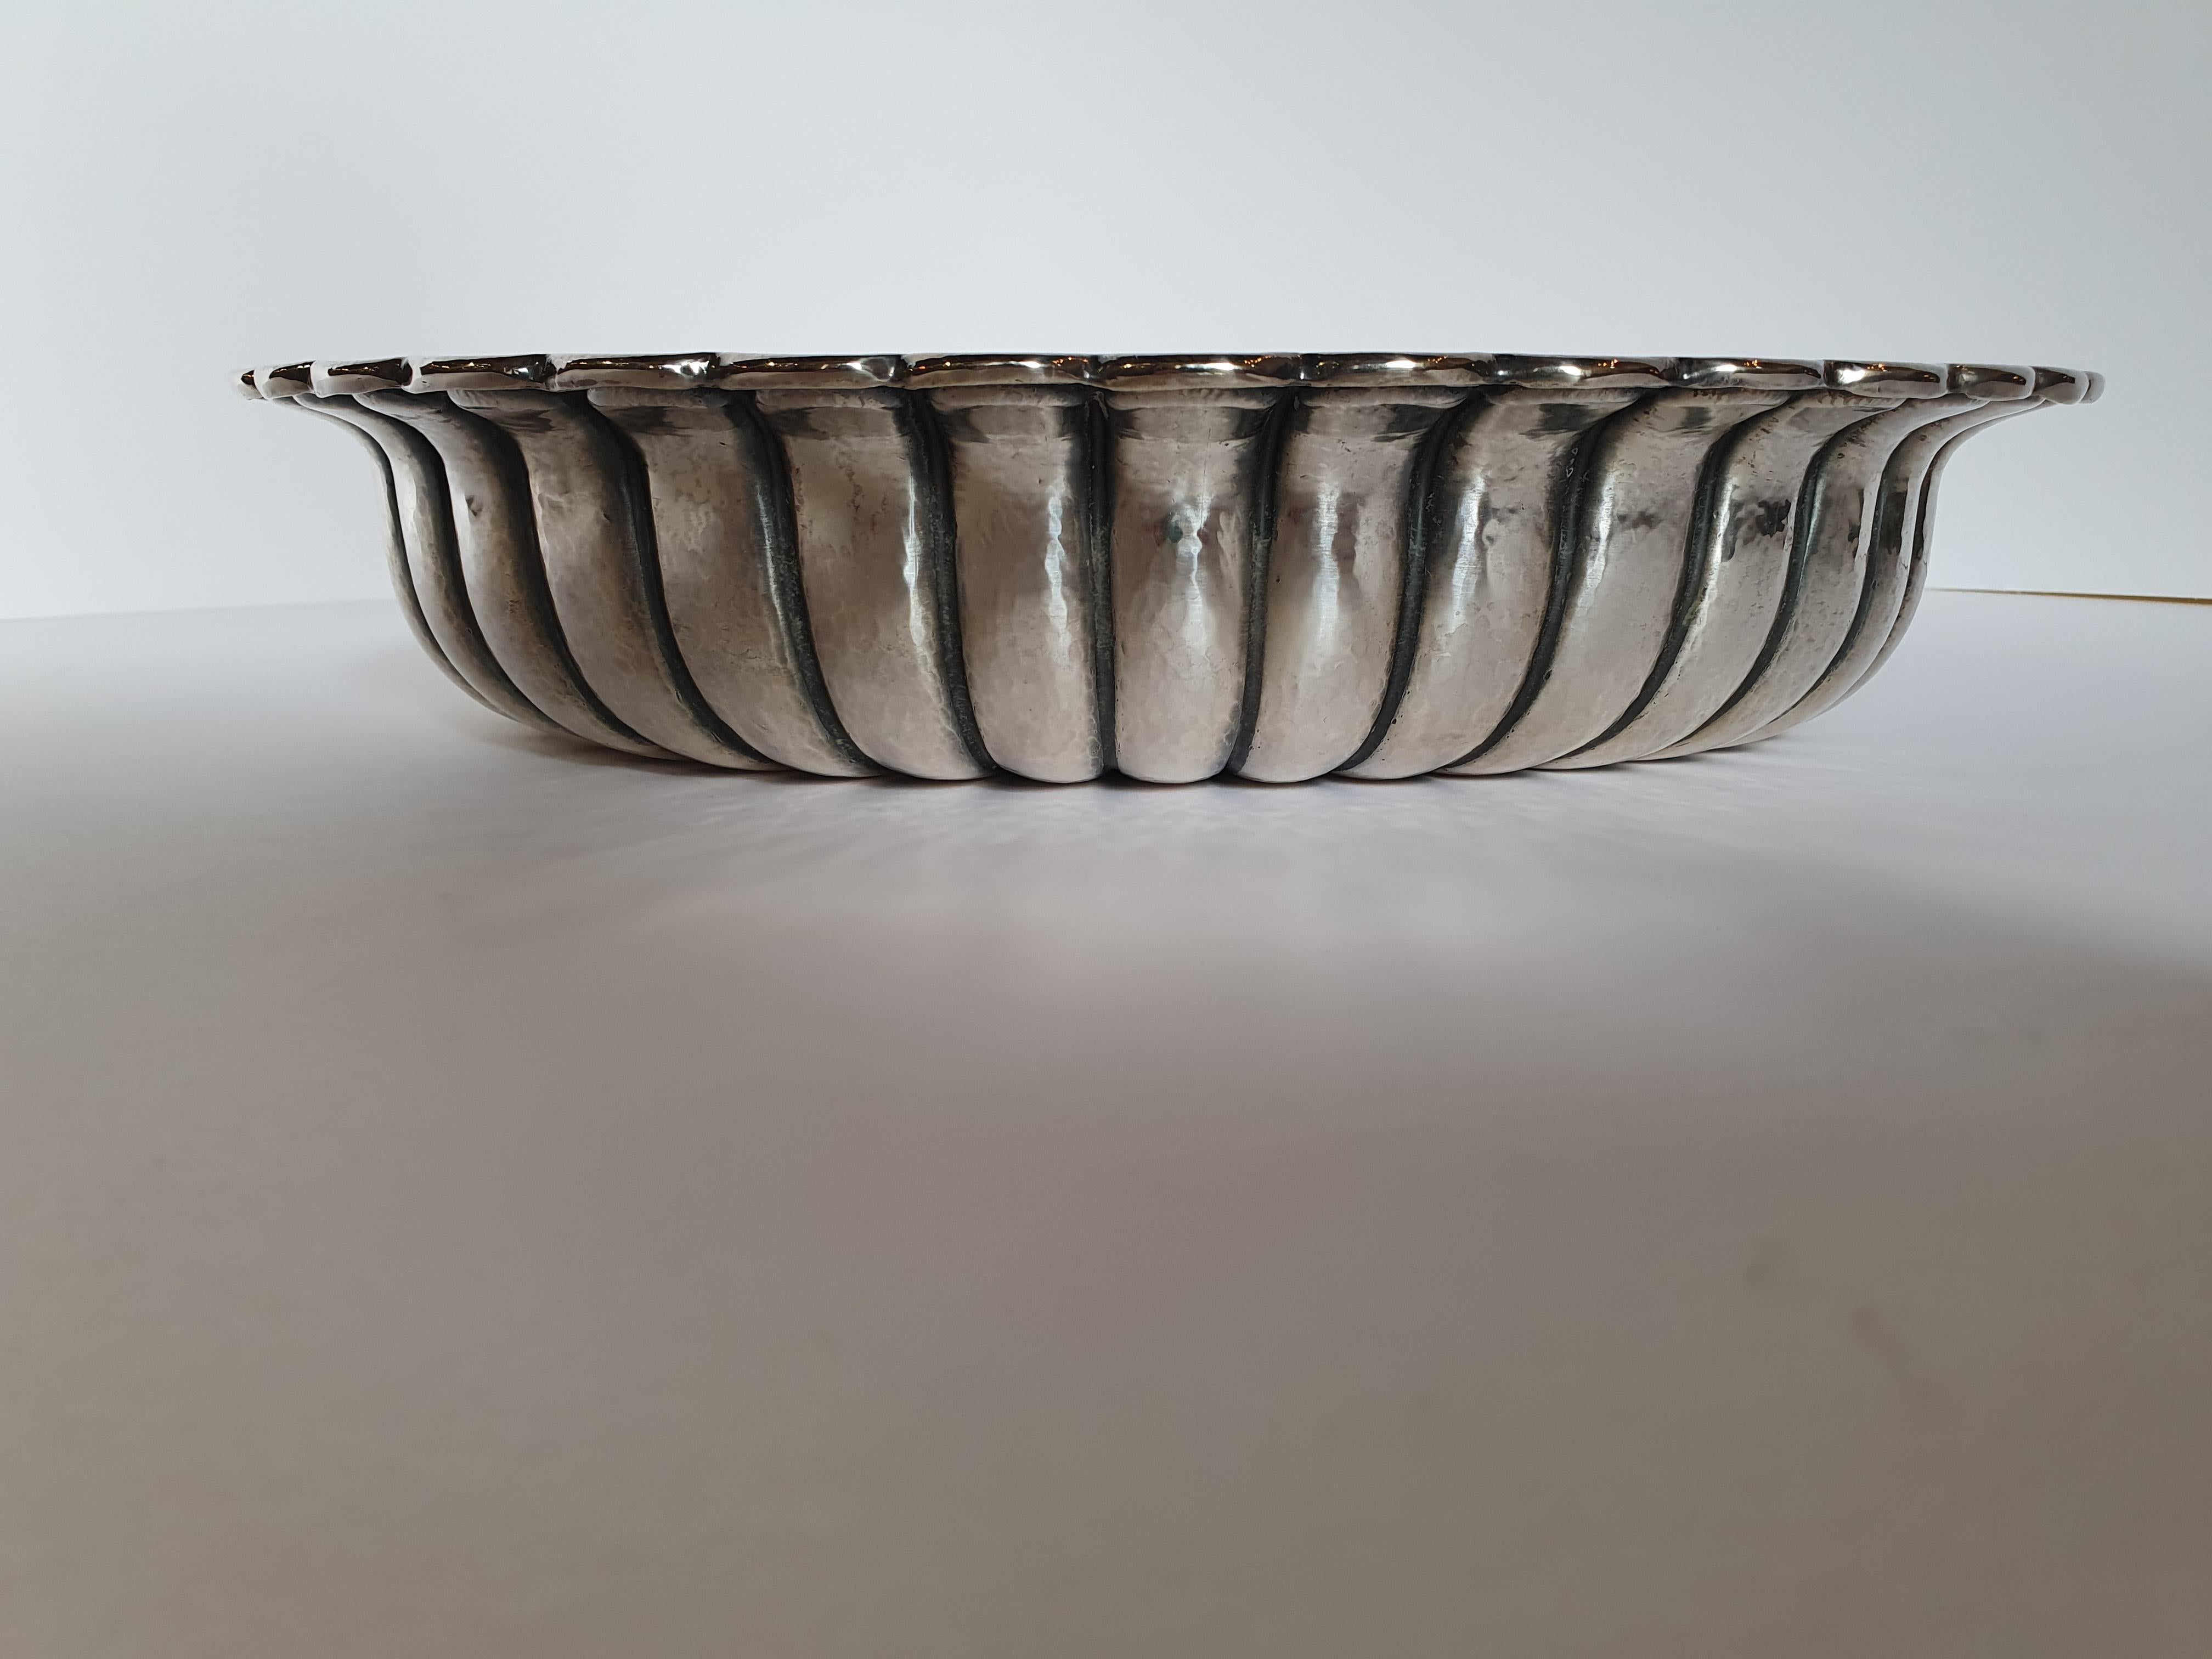 Baroque 20th Century Hand-Made Sterling Silver Oval Bowl by Ilario Pradella, Italy, 1980 For Sale